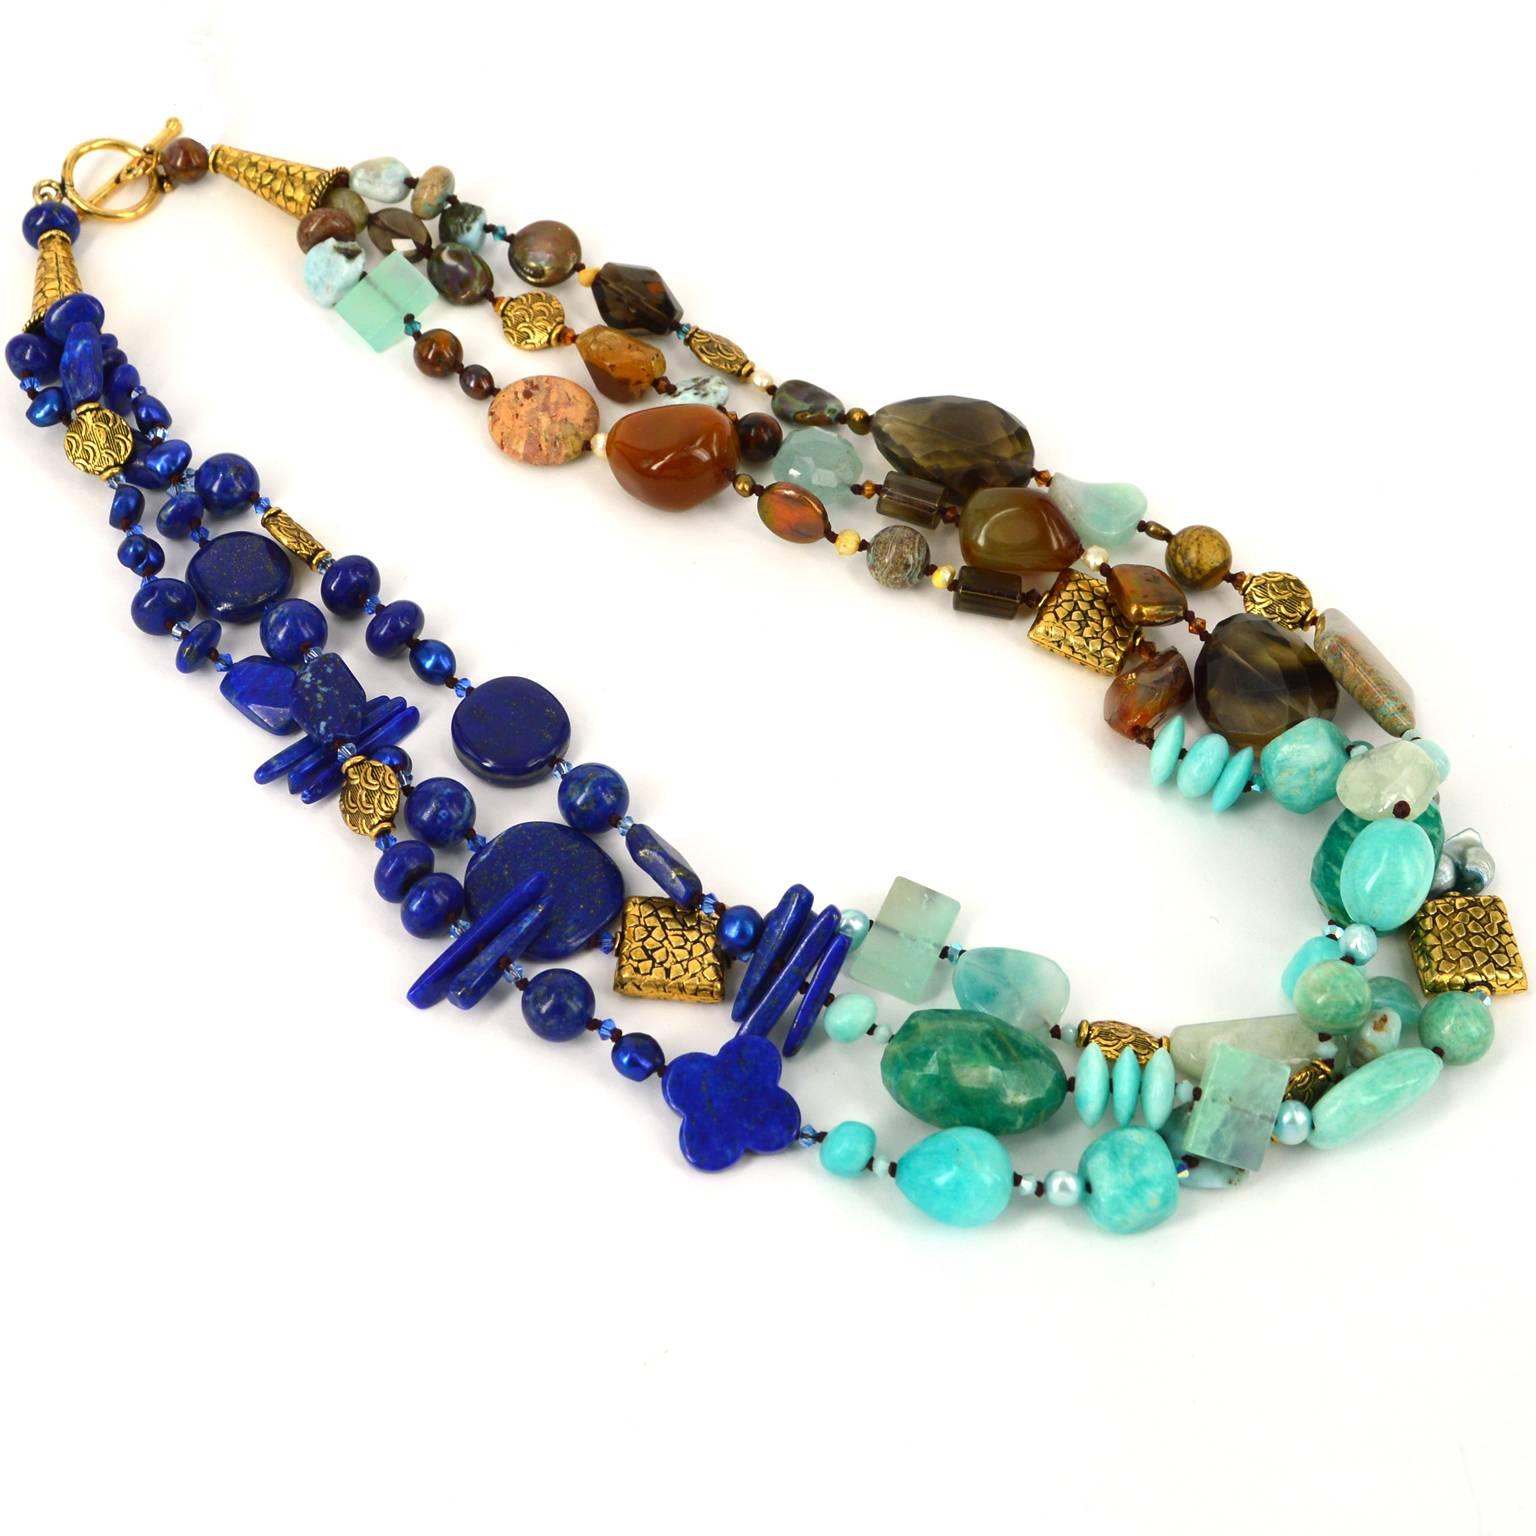 Lapis Dreams- 3 strands of Natural Afghanistan Lapis Lazuli, Amazonite  Peruvian and Russian, Jade, Aquamarine, Larimar  flowing to Smokey quartz, Agate, Jasper with accents in Fresh Water Pearls and Swarovski Beads. 
Clasp and Beads are thick Gold